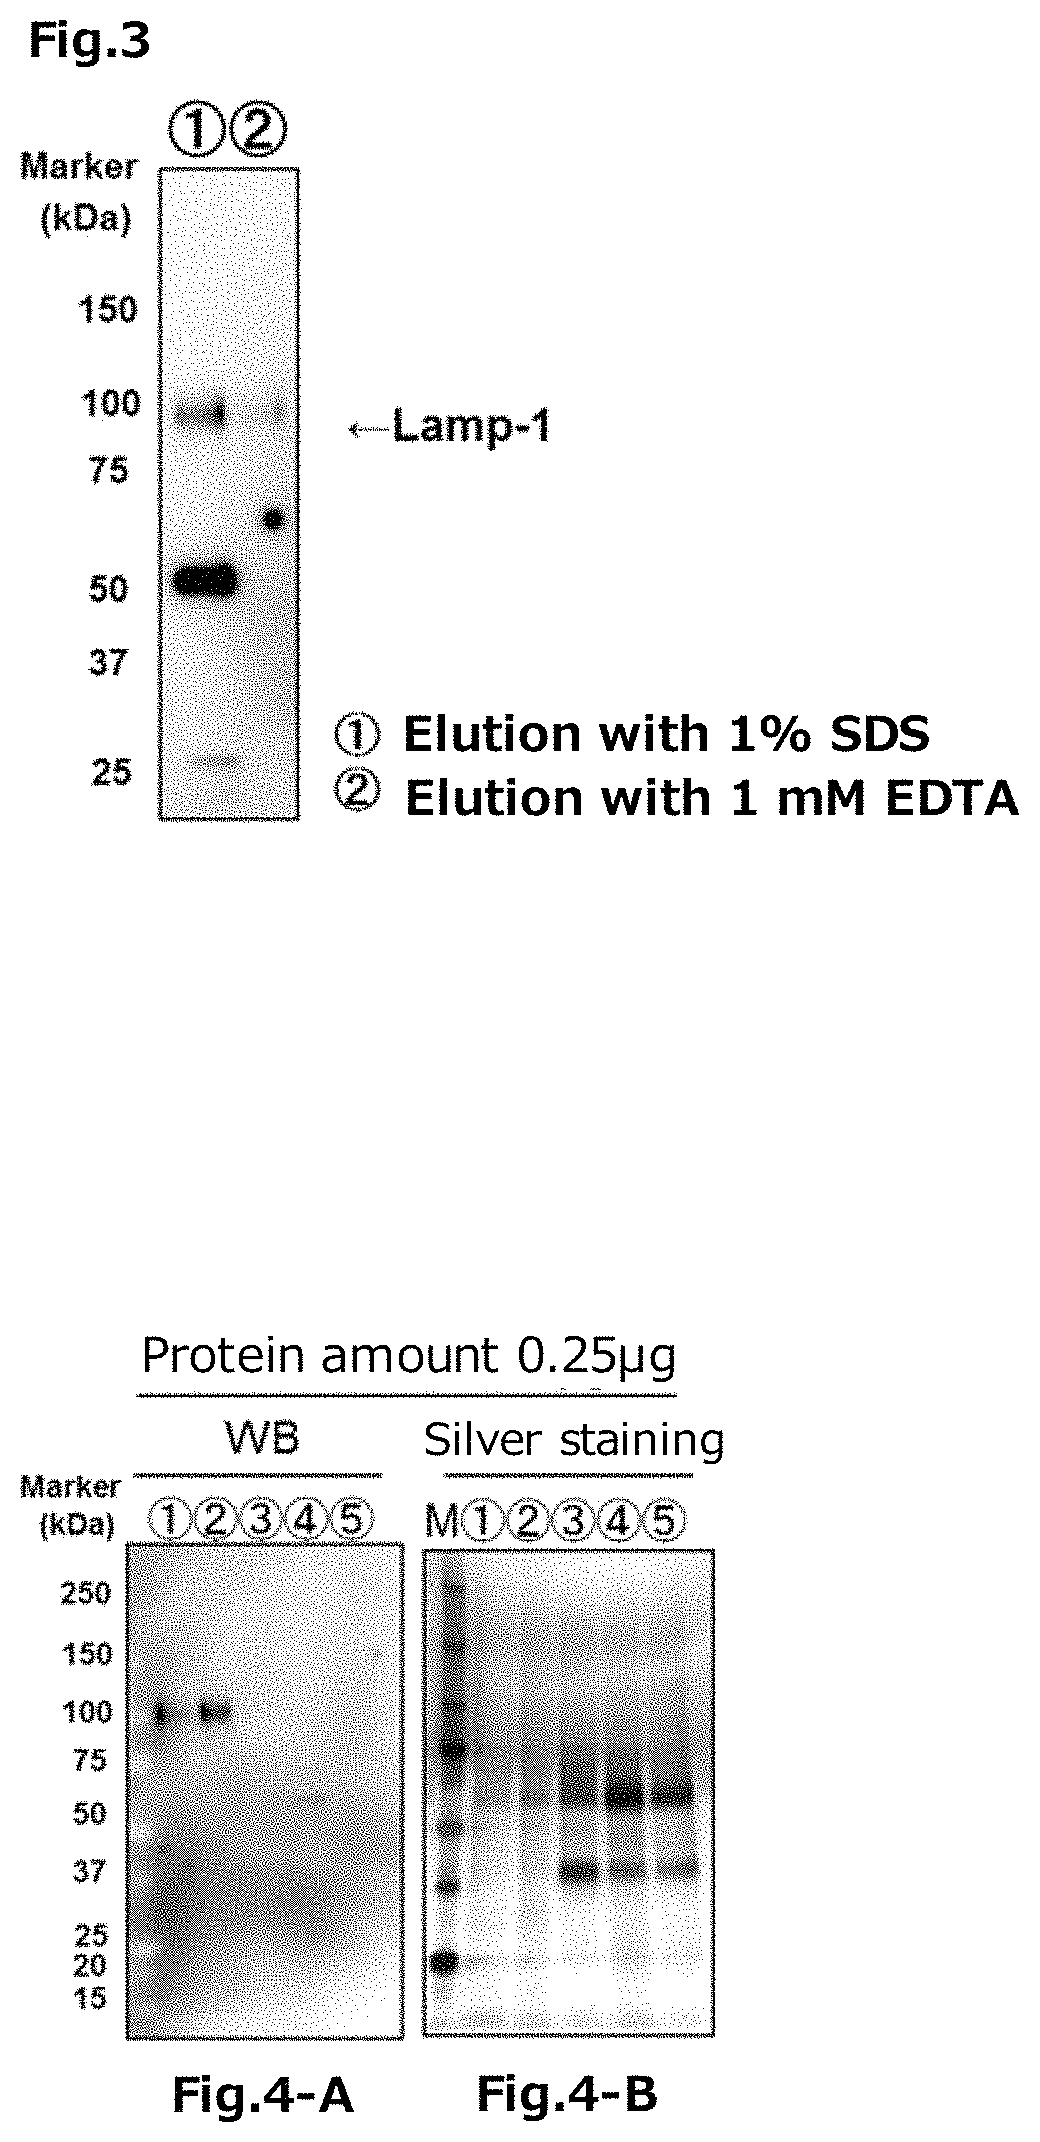 Tim protein-bound carrier, methods for obtaining, removing and detecting extracellular membrane vesicles and viruses using said carrier, and kit including said carrier